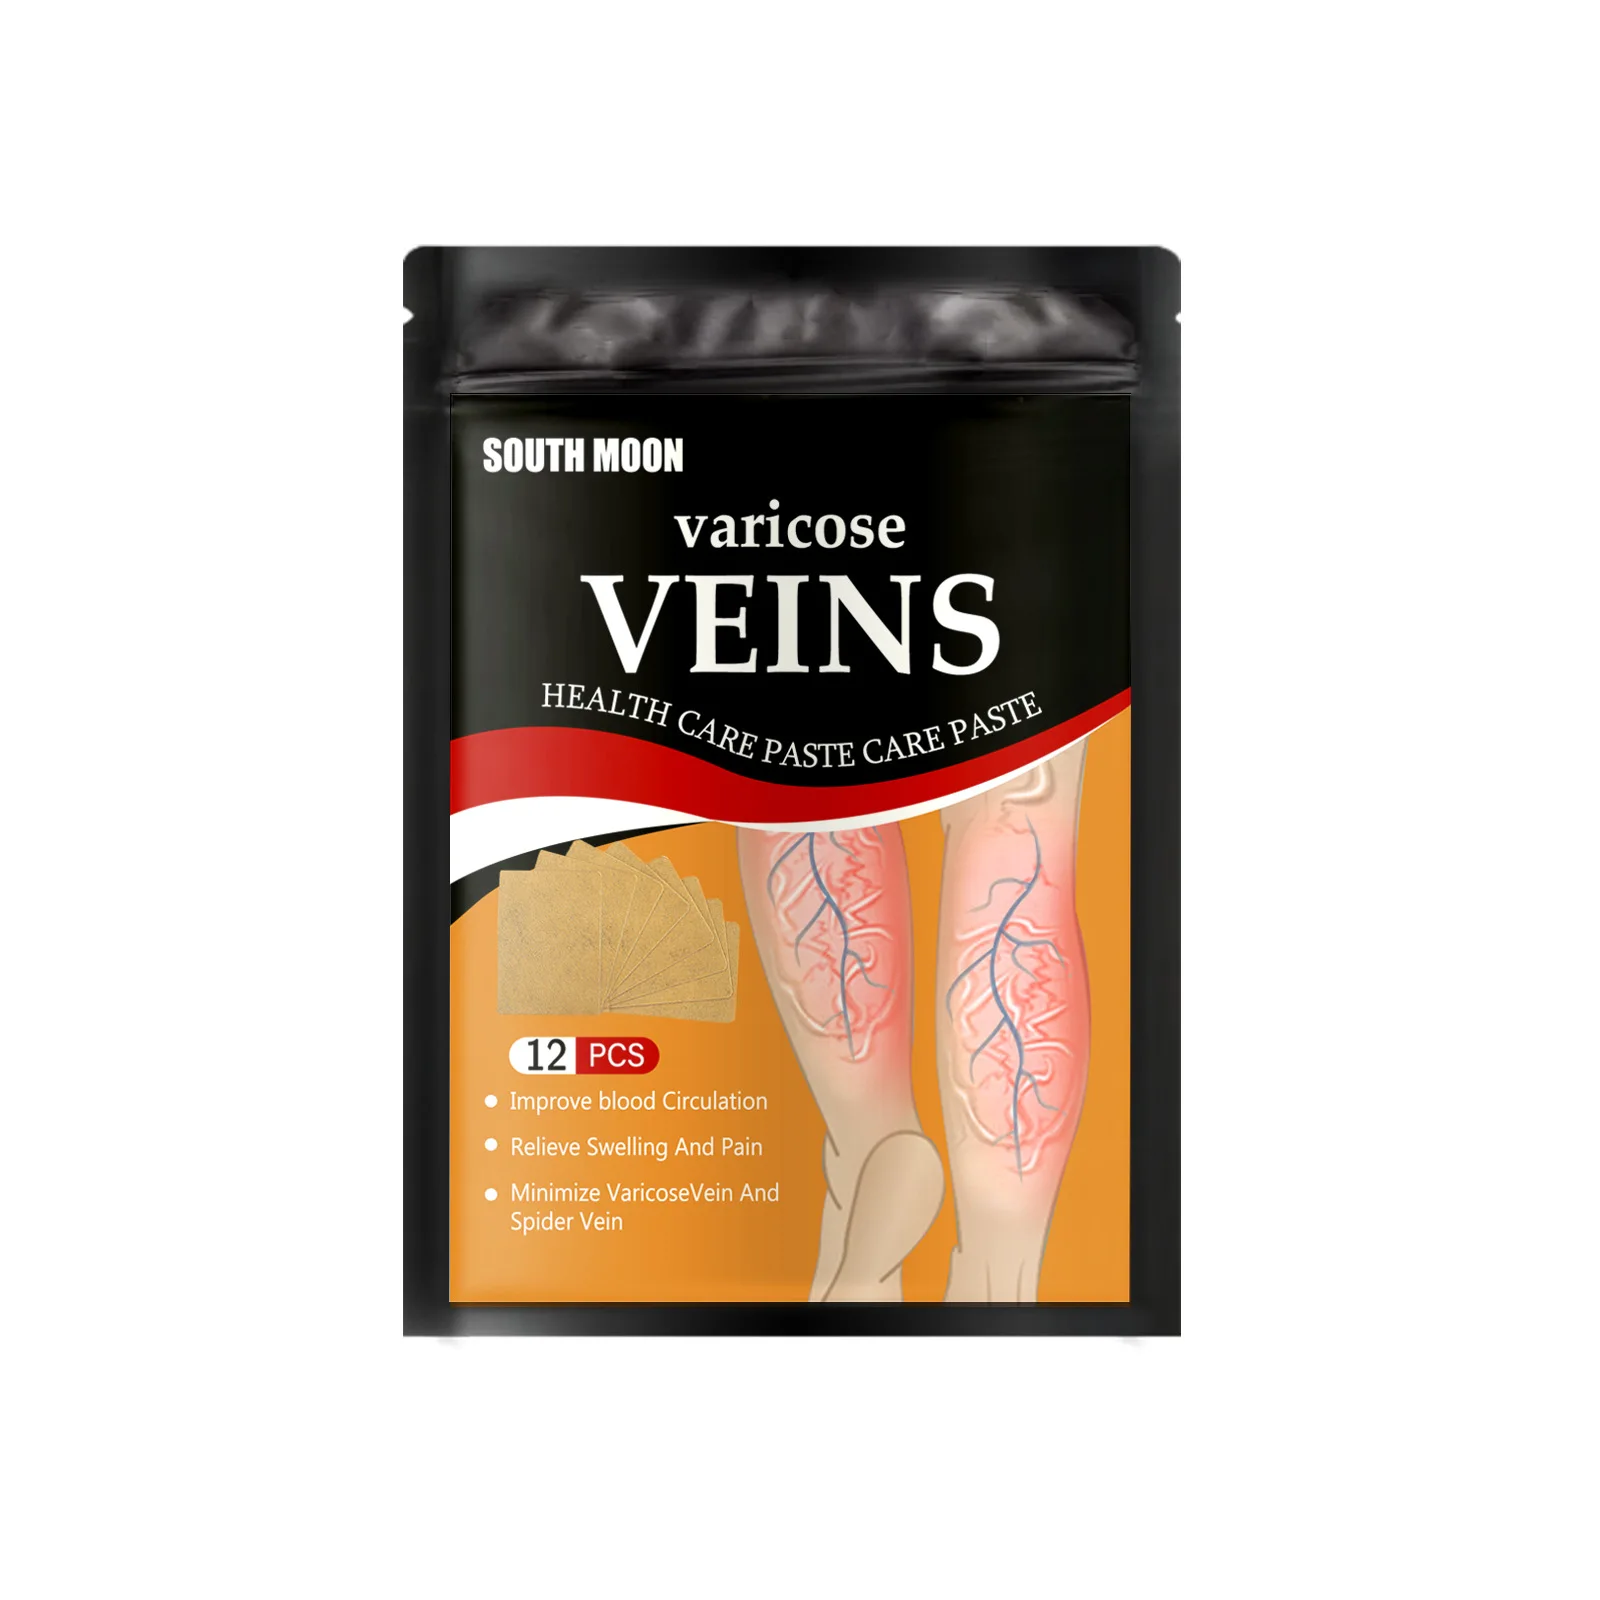 South Moon Varicose Veins Phlebitis Spider Earthworm Leg Relief Patch Anti Swelling for Foot Health Care Removal Leg Pain 12pcs